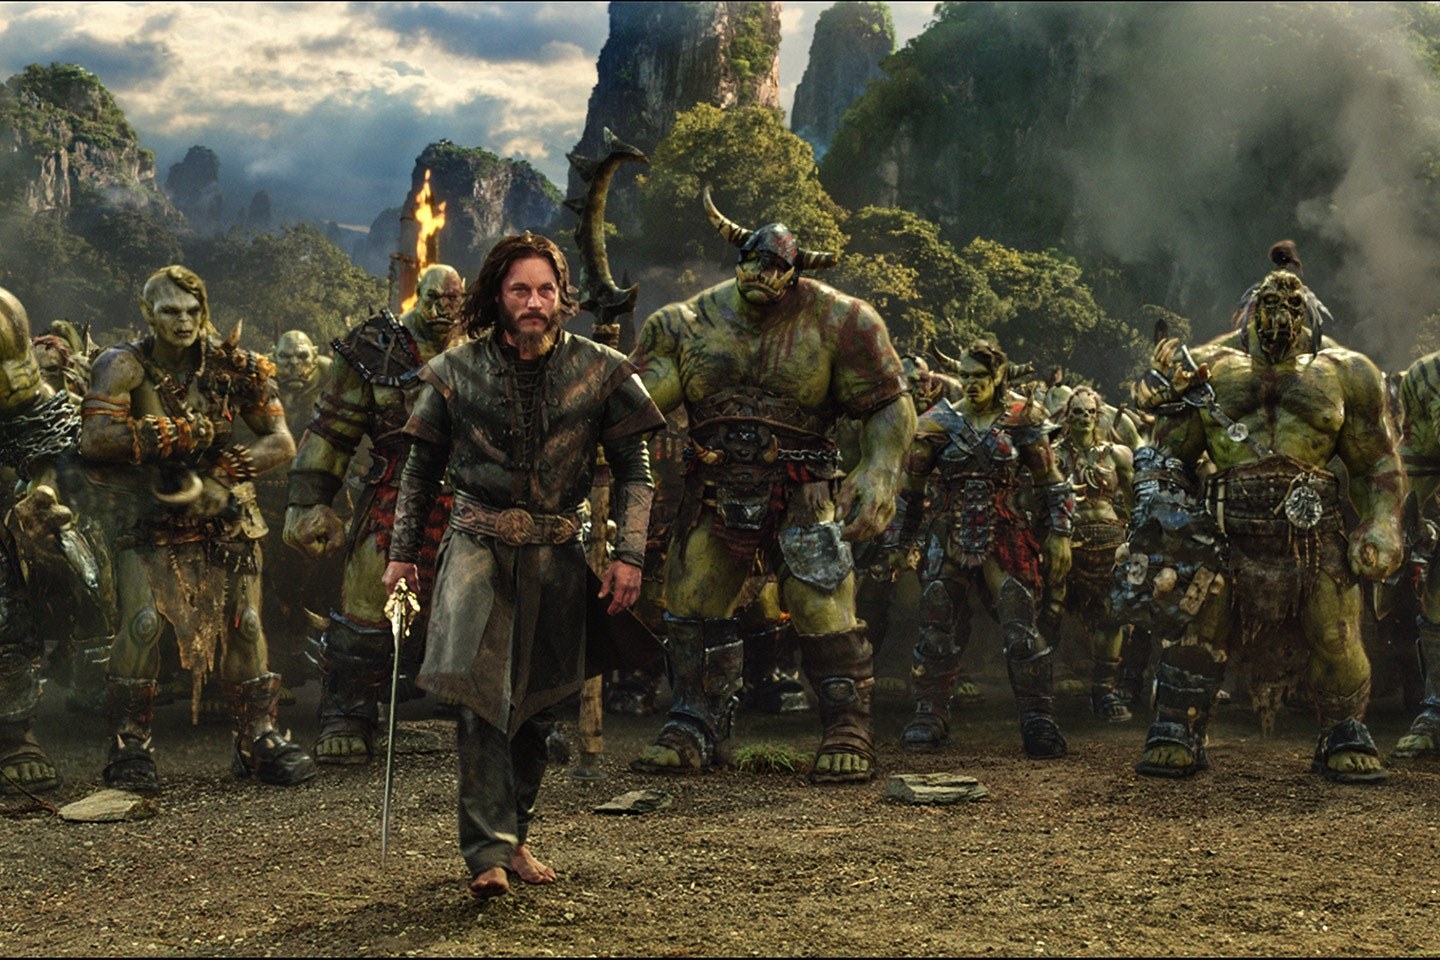 the orcs prepare themselves for battle